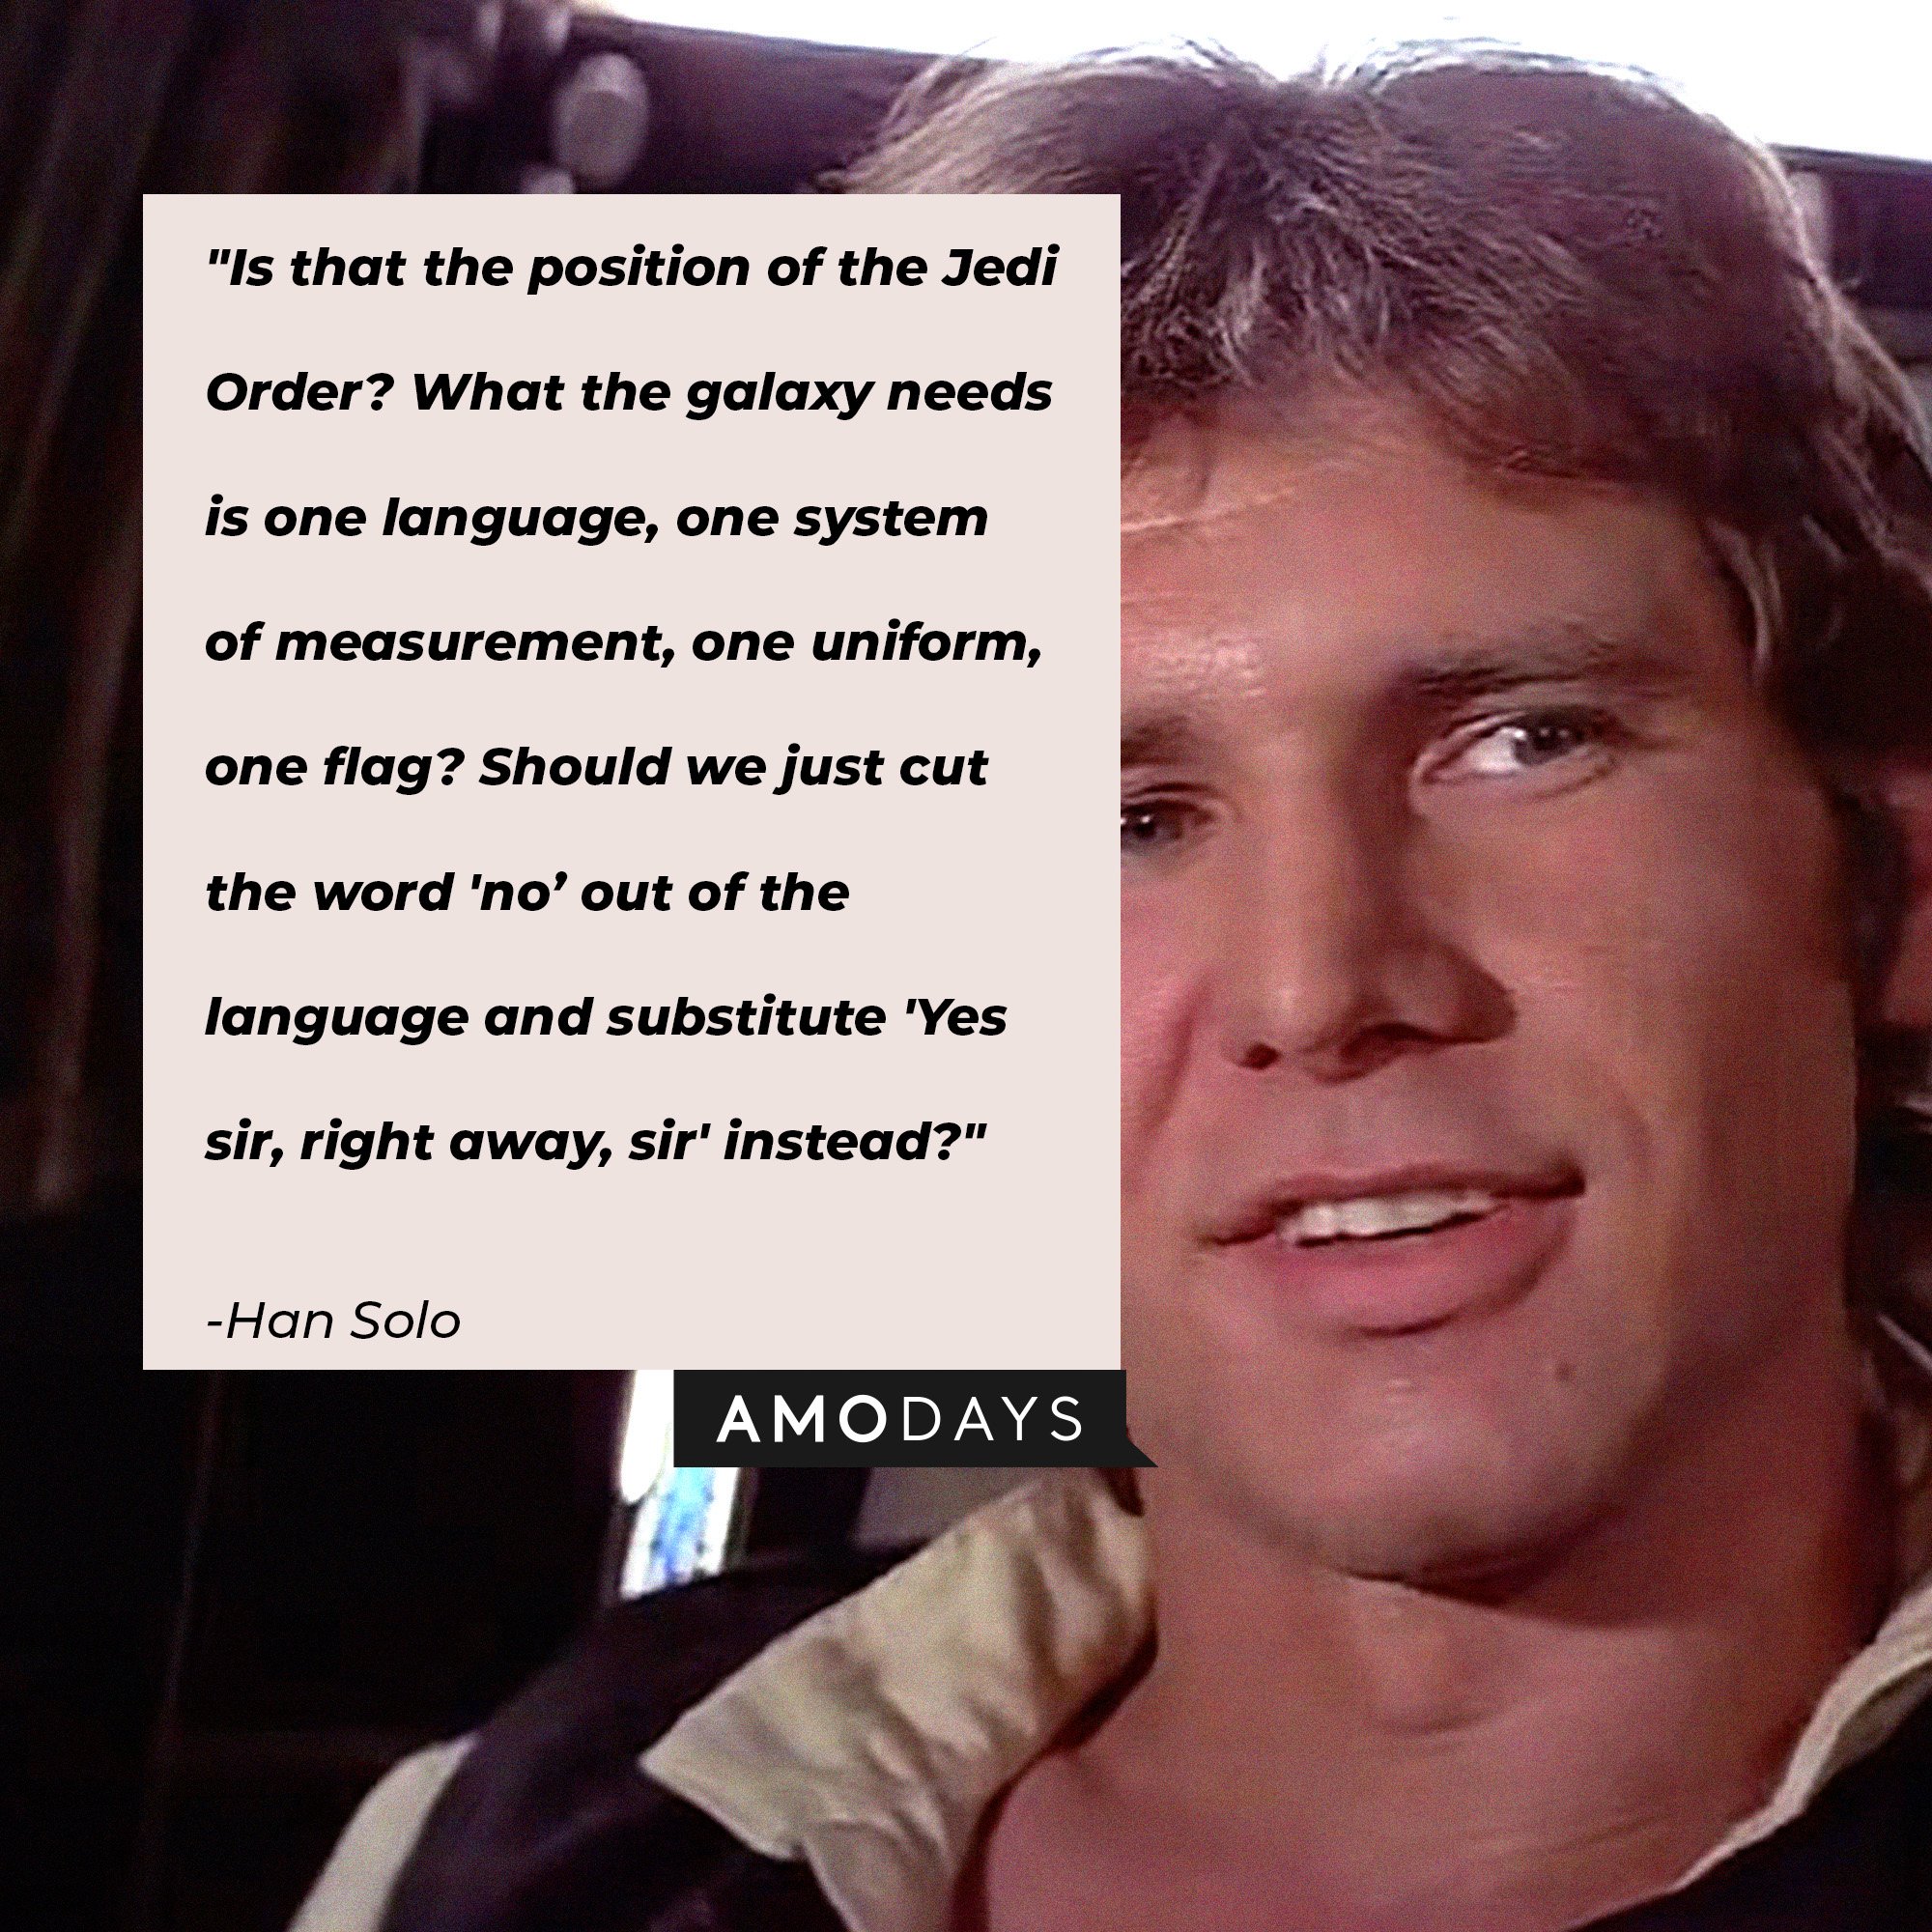 Han Solo’s quote: "Is that the position of the Jedi Order? What the galaxy needs is one language, one system of measurement, one uniform, one flag? Should we just cut the word 'no’ out of the language and substitute 'Yes sir, right away, sir' instead?" | Image: AmoDays